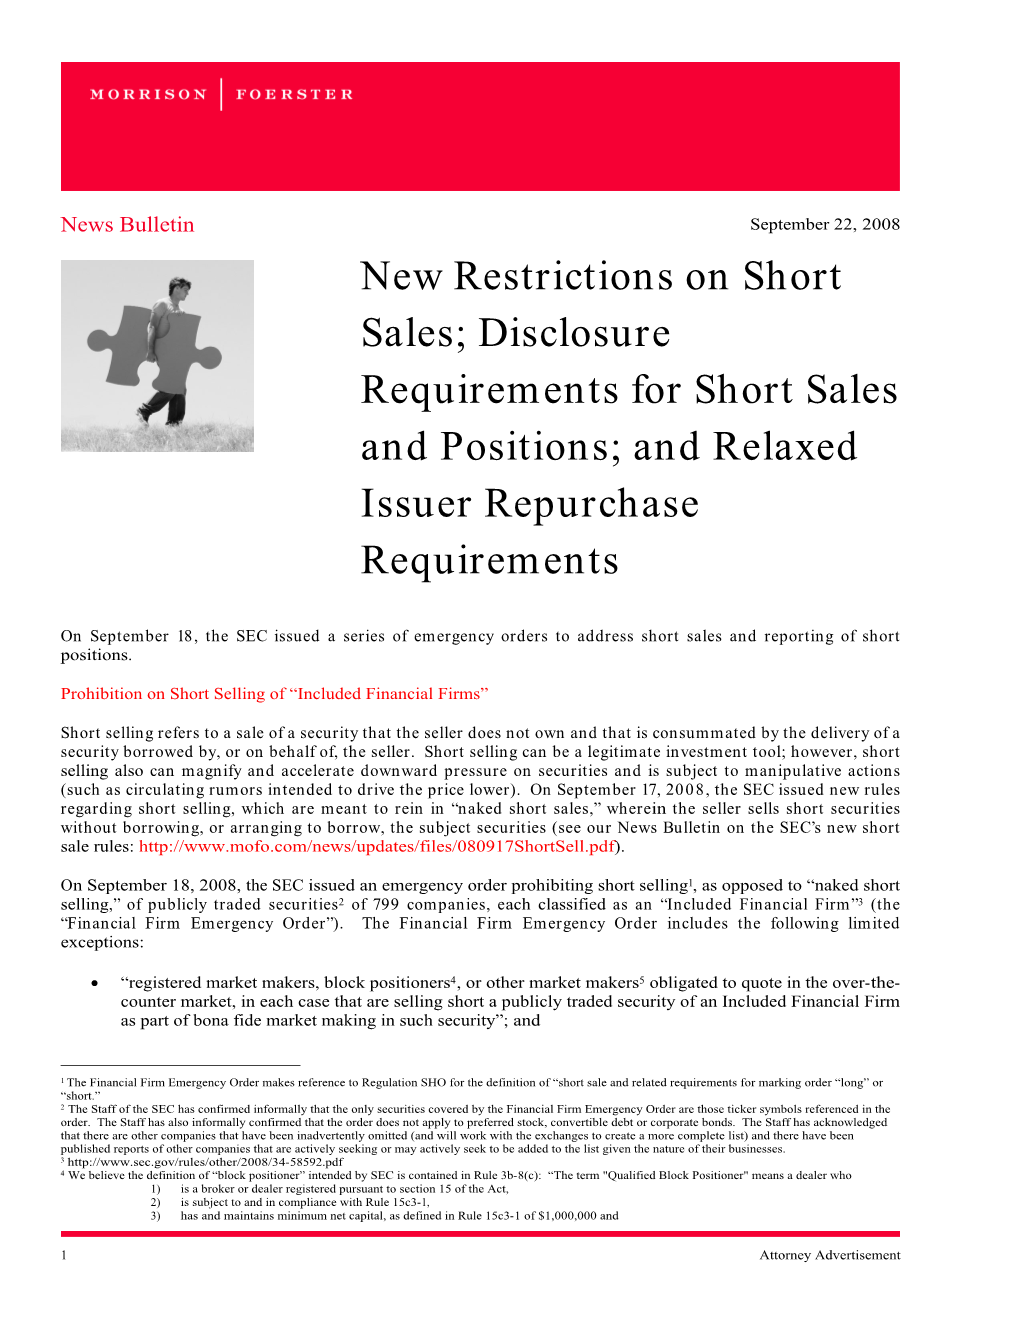 New Restrictions on Short Sales; Disclosure Requirements for Short Sales and Positions; and Relaxed Issuer Repurchase Requirements